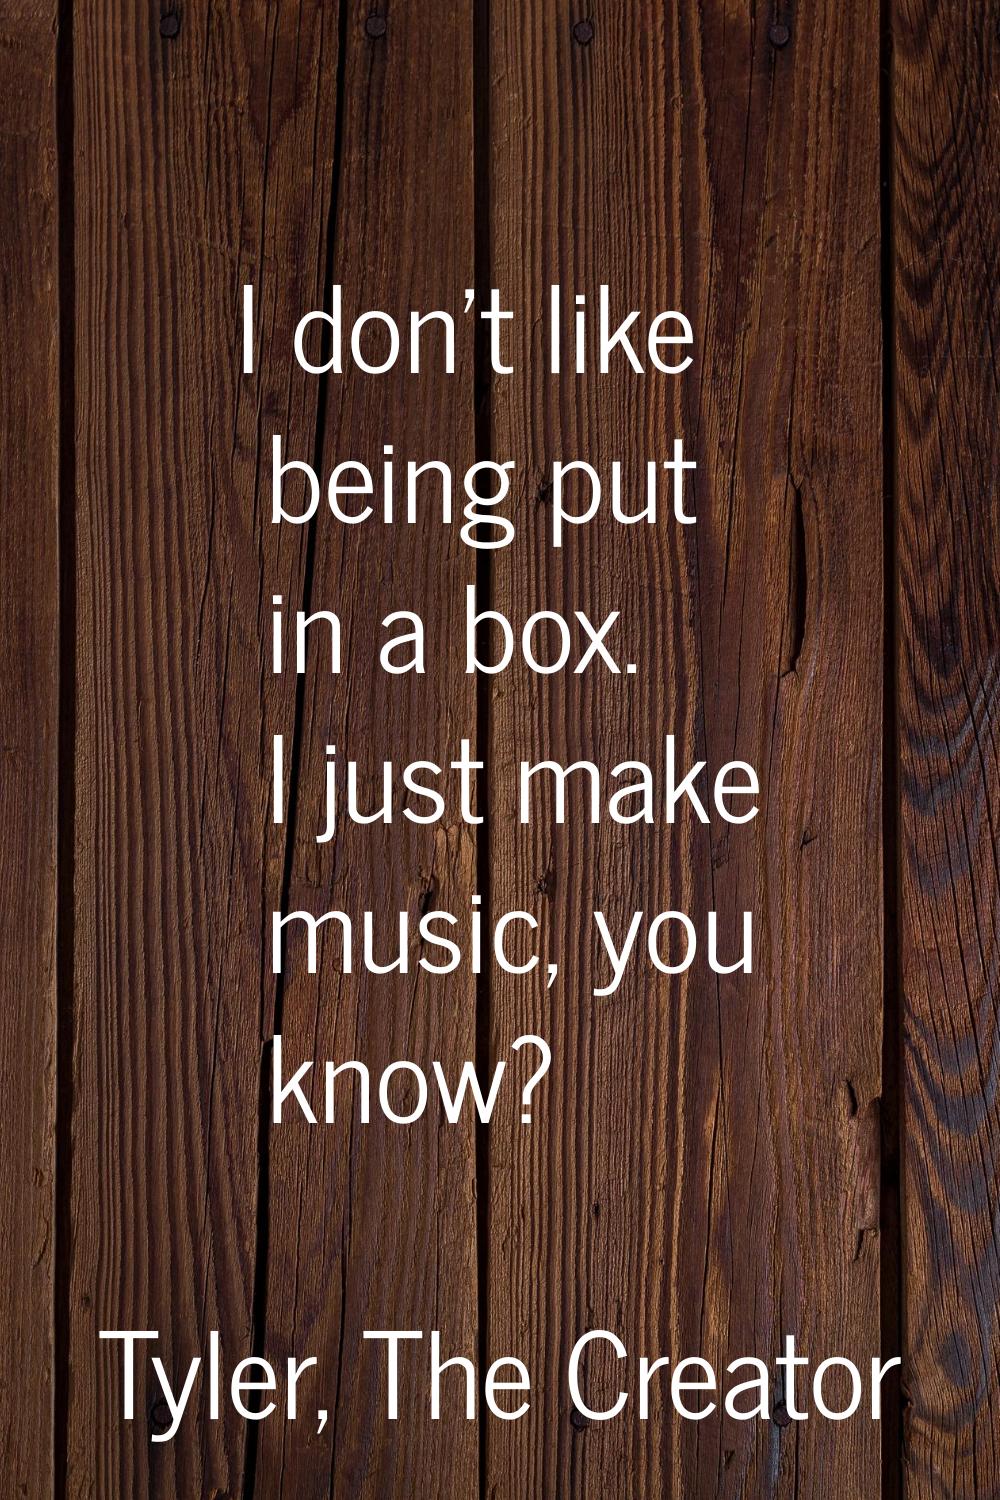 I don't like being put in a box. I just make music, you know?